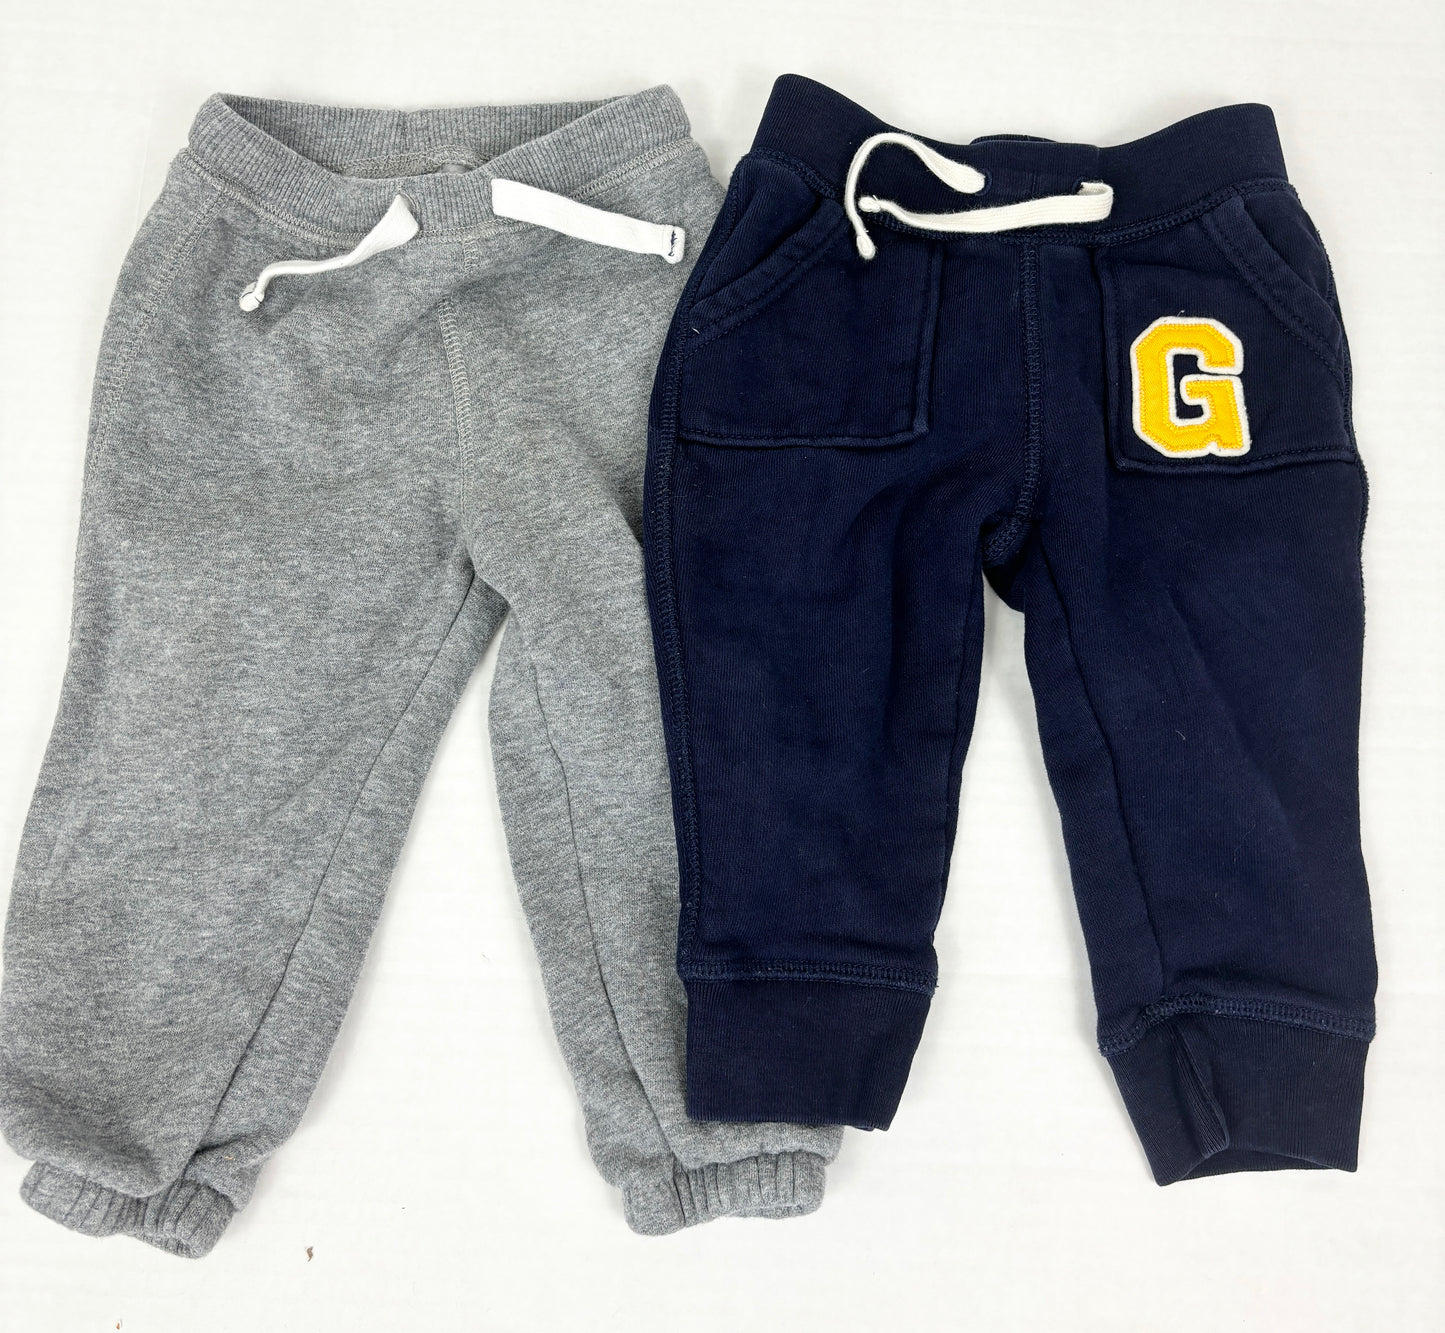 Boys 18 Months Gray and Navy Joggers-Gap & Carters